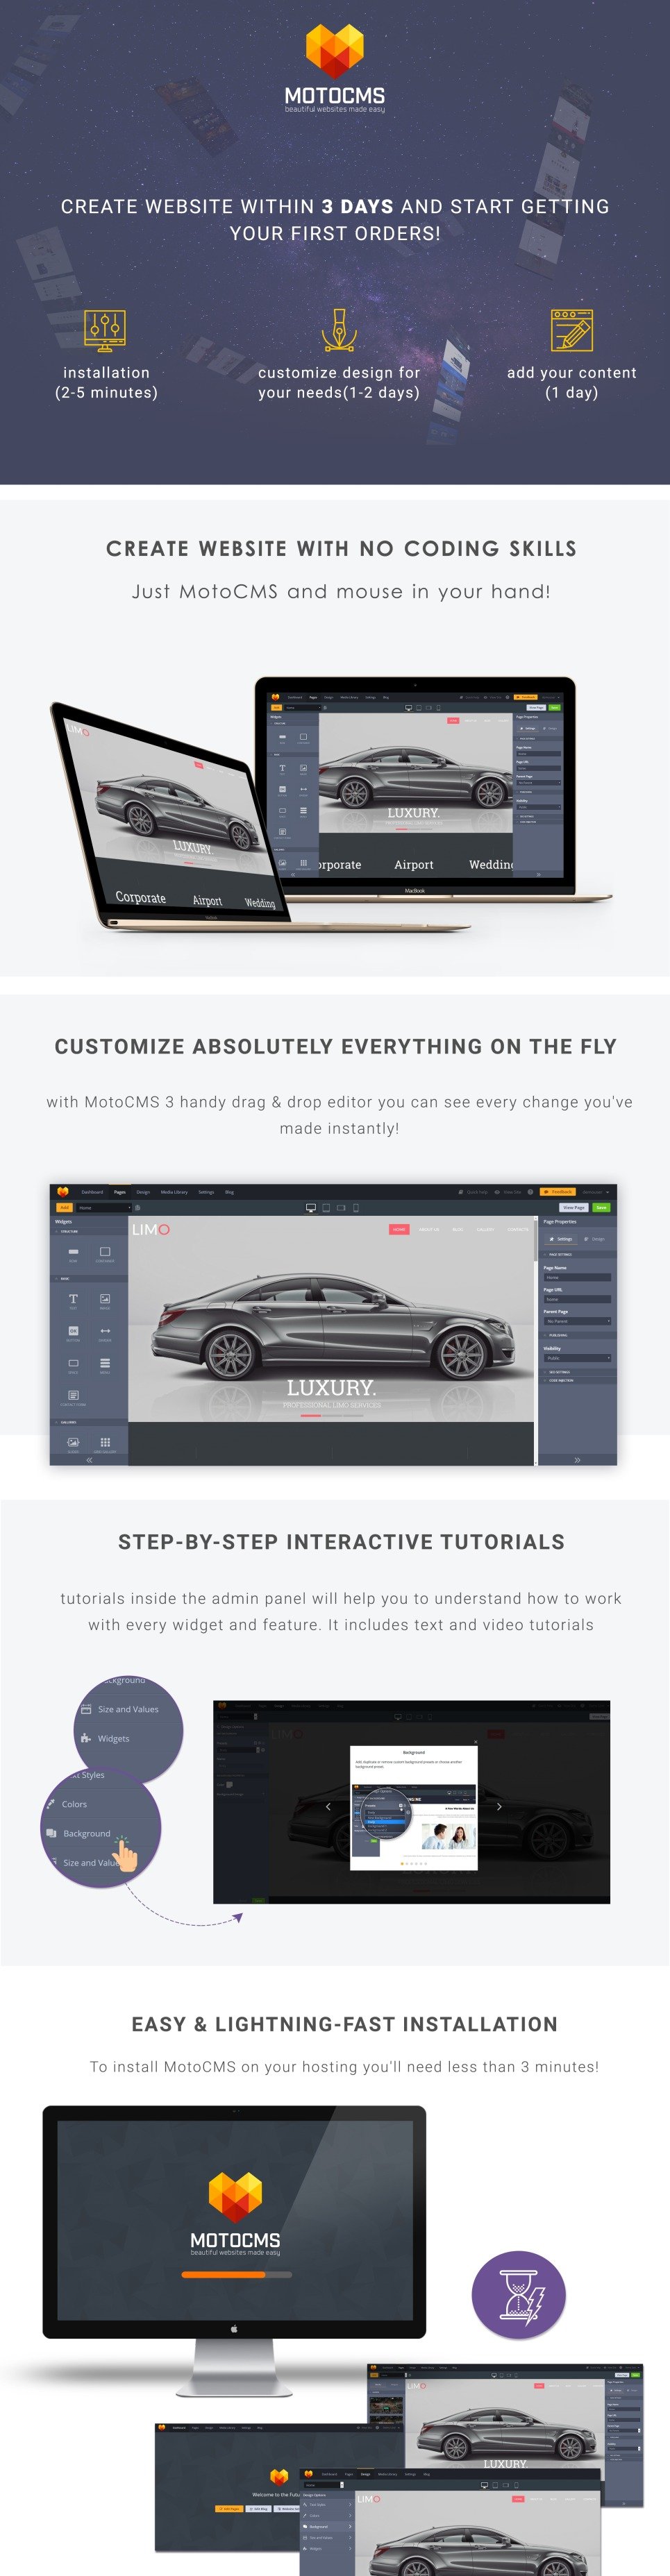 limo-website-template-for-limousine-rental-services-motocms